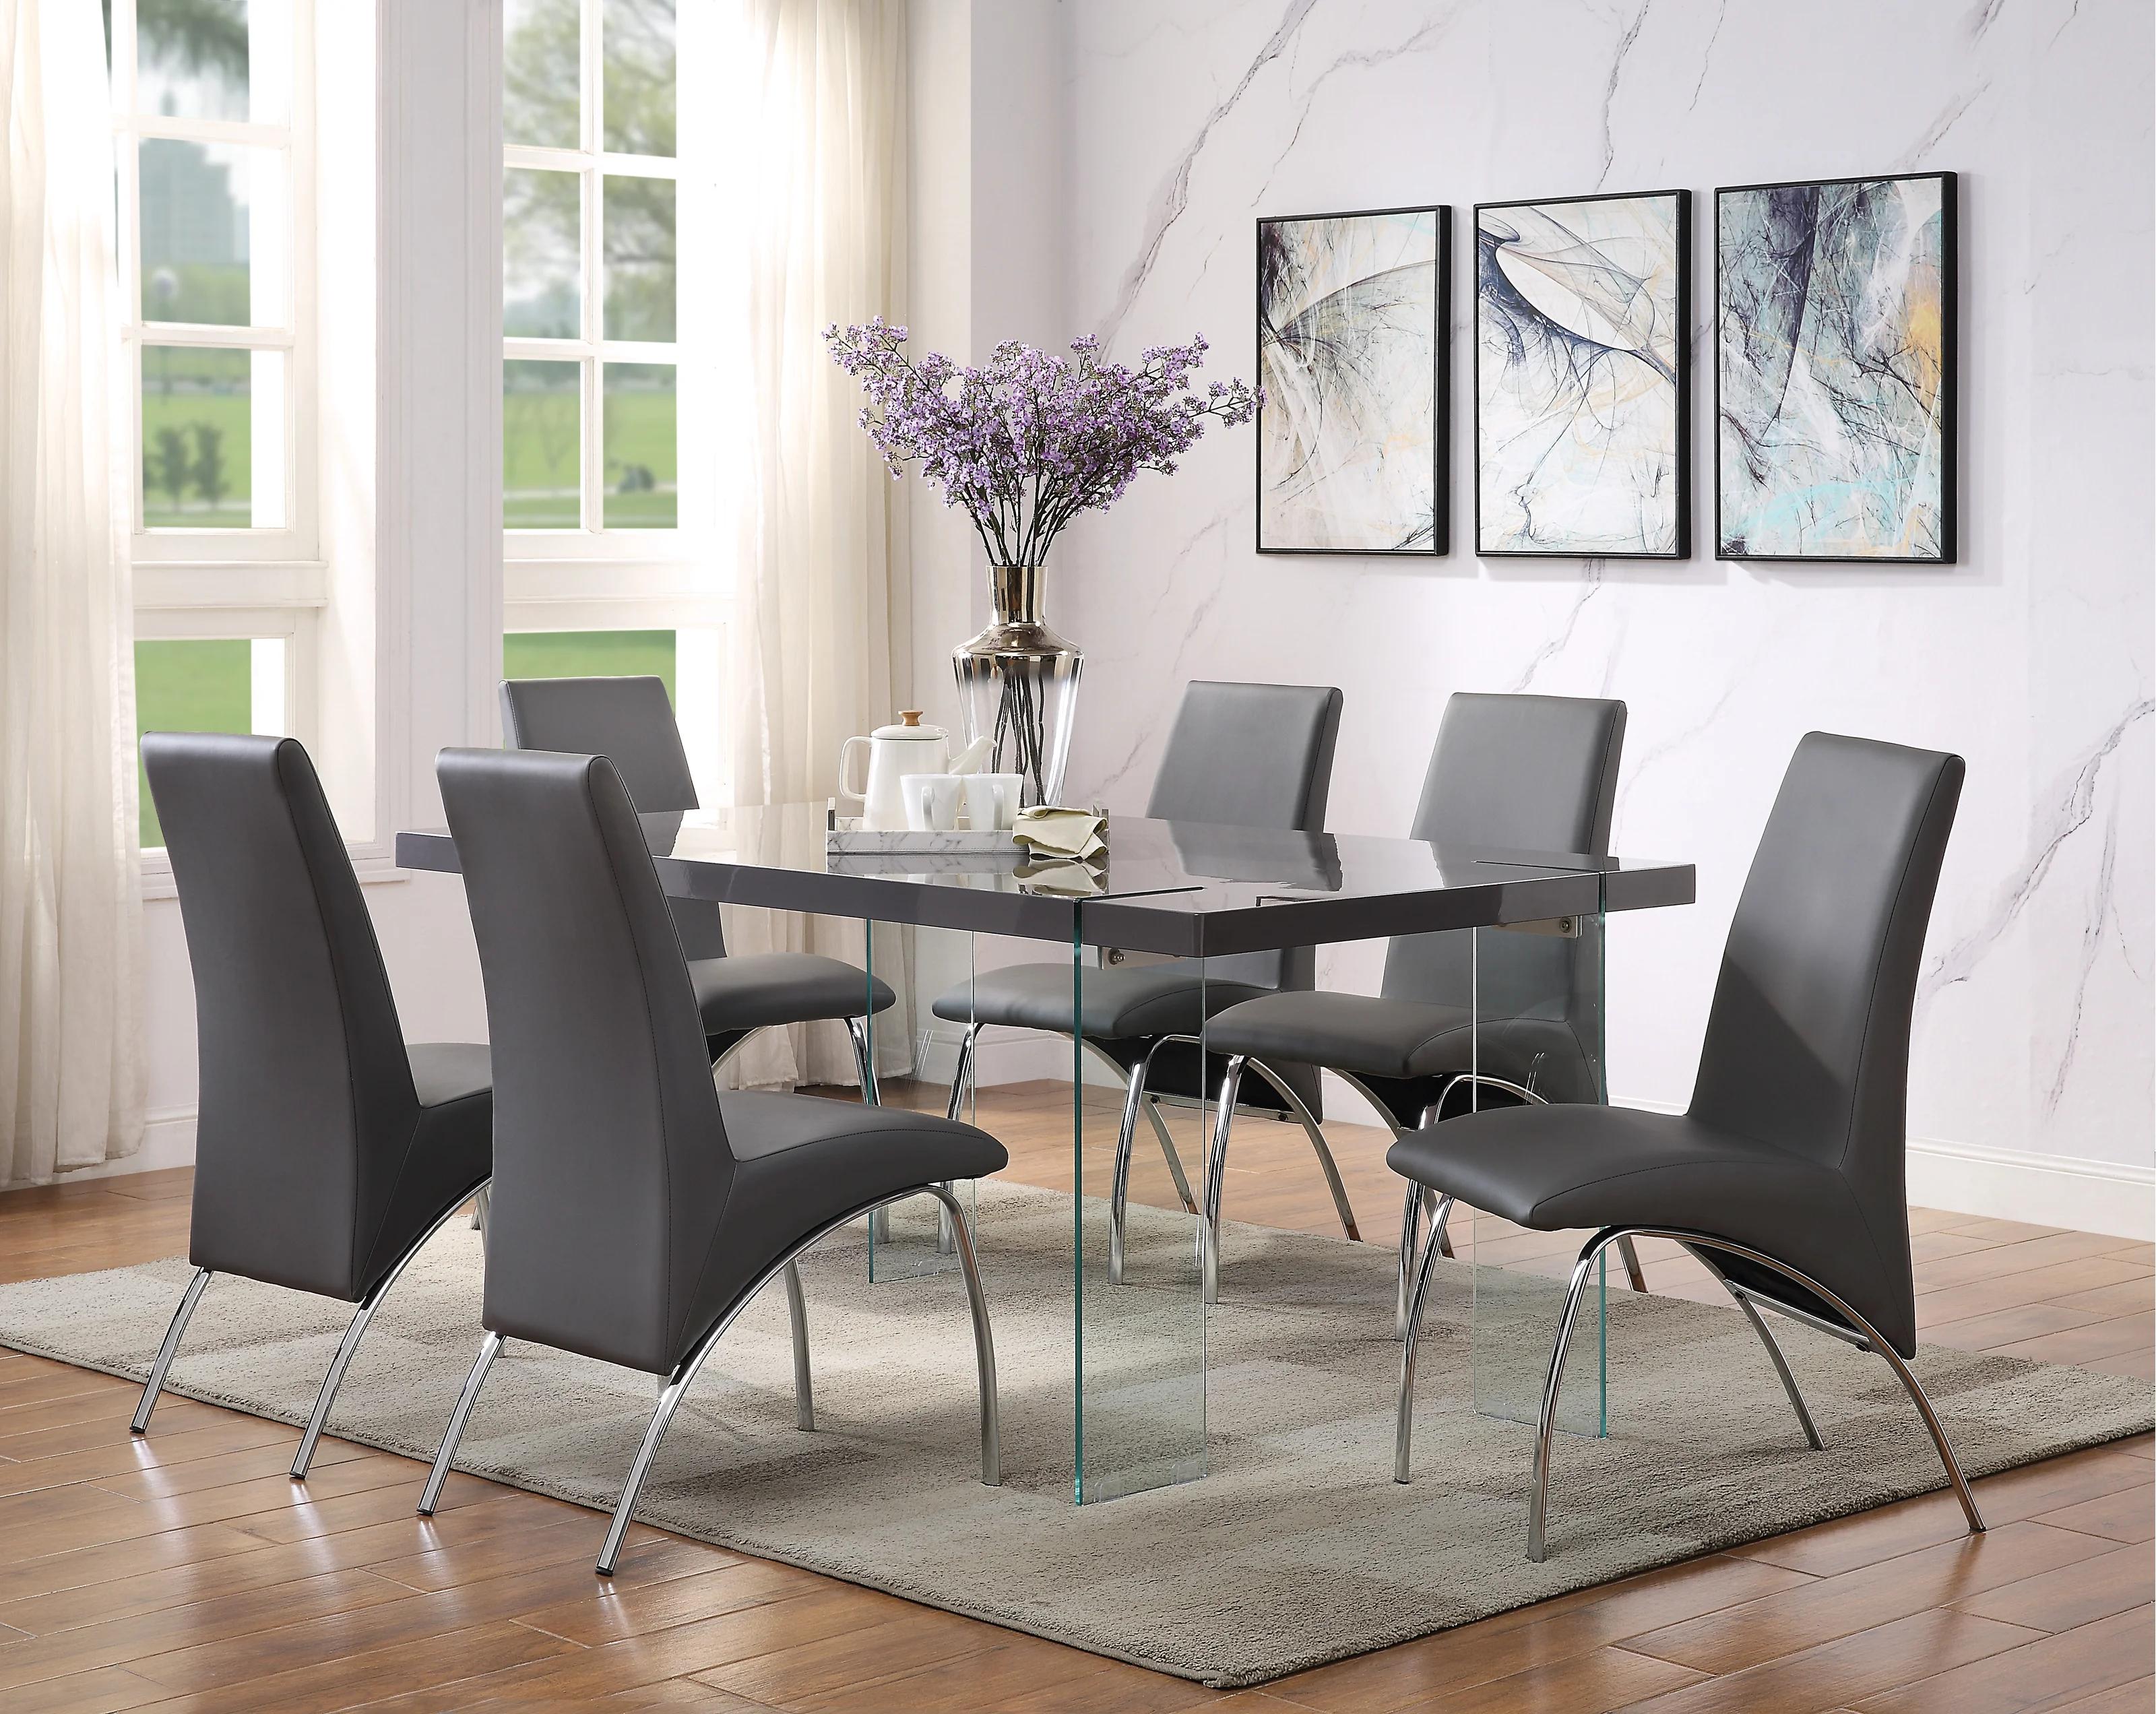 Modern Dining Table Set Noland 72190-5pcs in Gray 